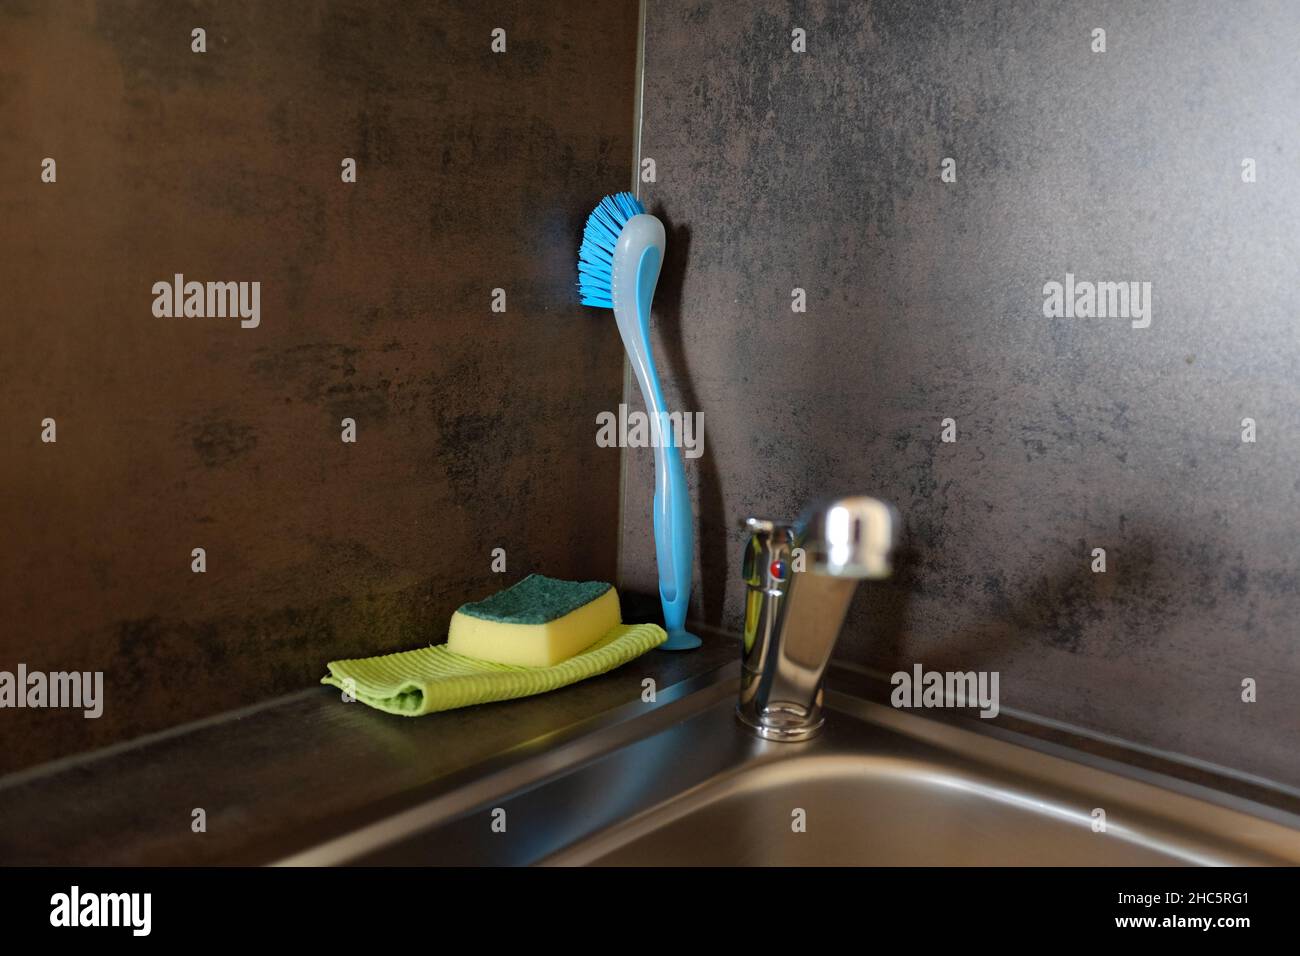 Closeup of a kitchen sink with cleaning materials behind it on the wall Stock Photo